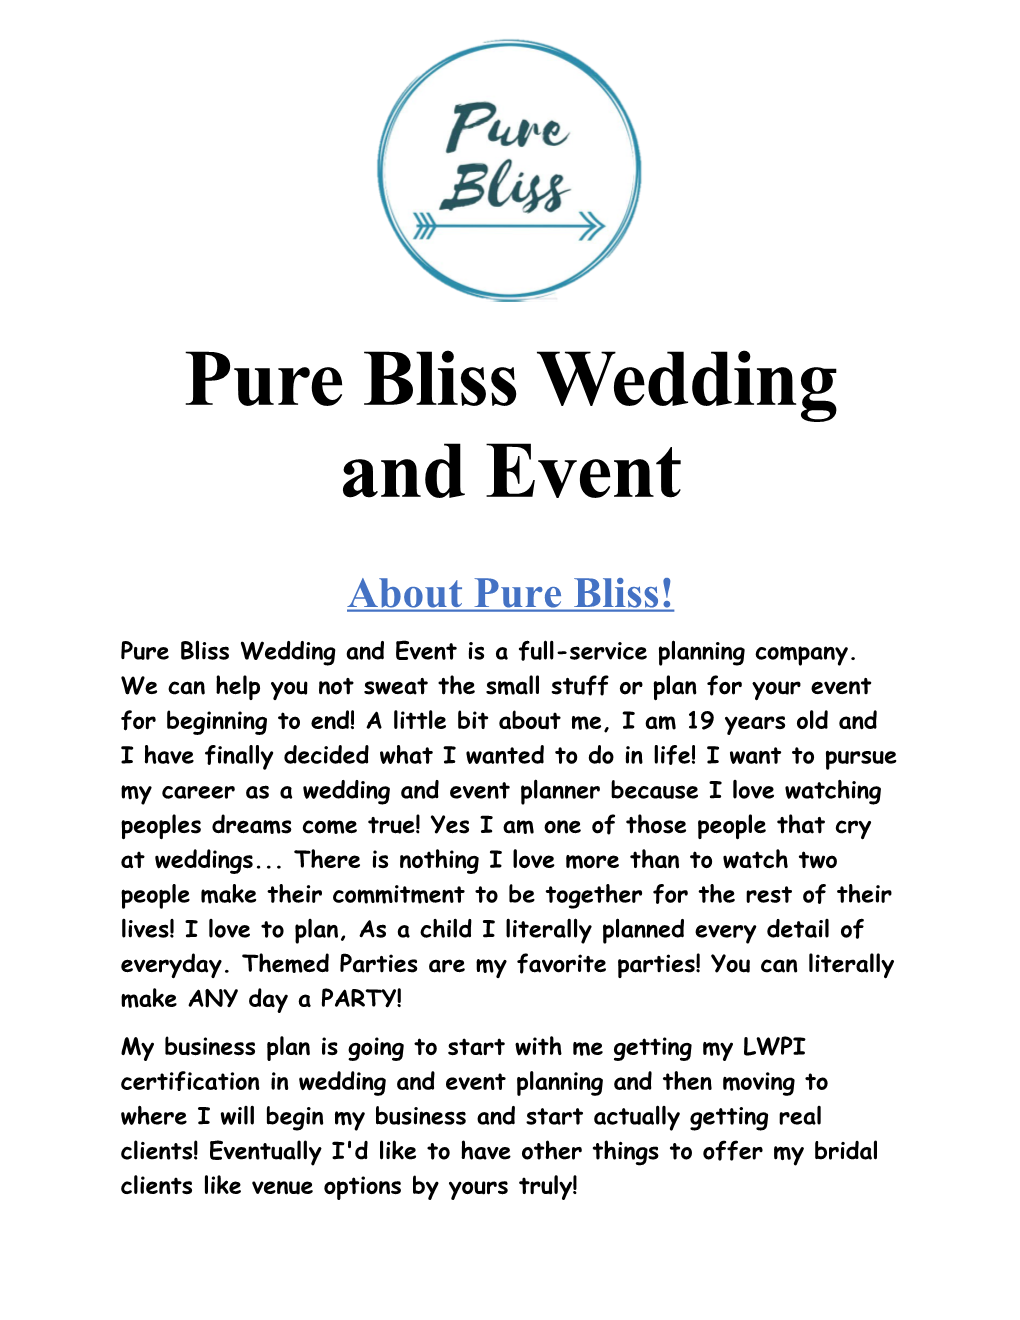 Pure Bliss Wedding and Event